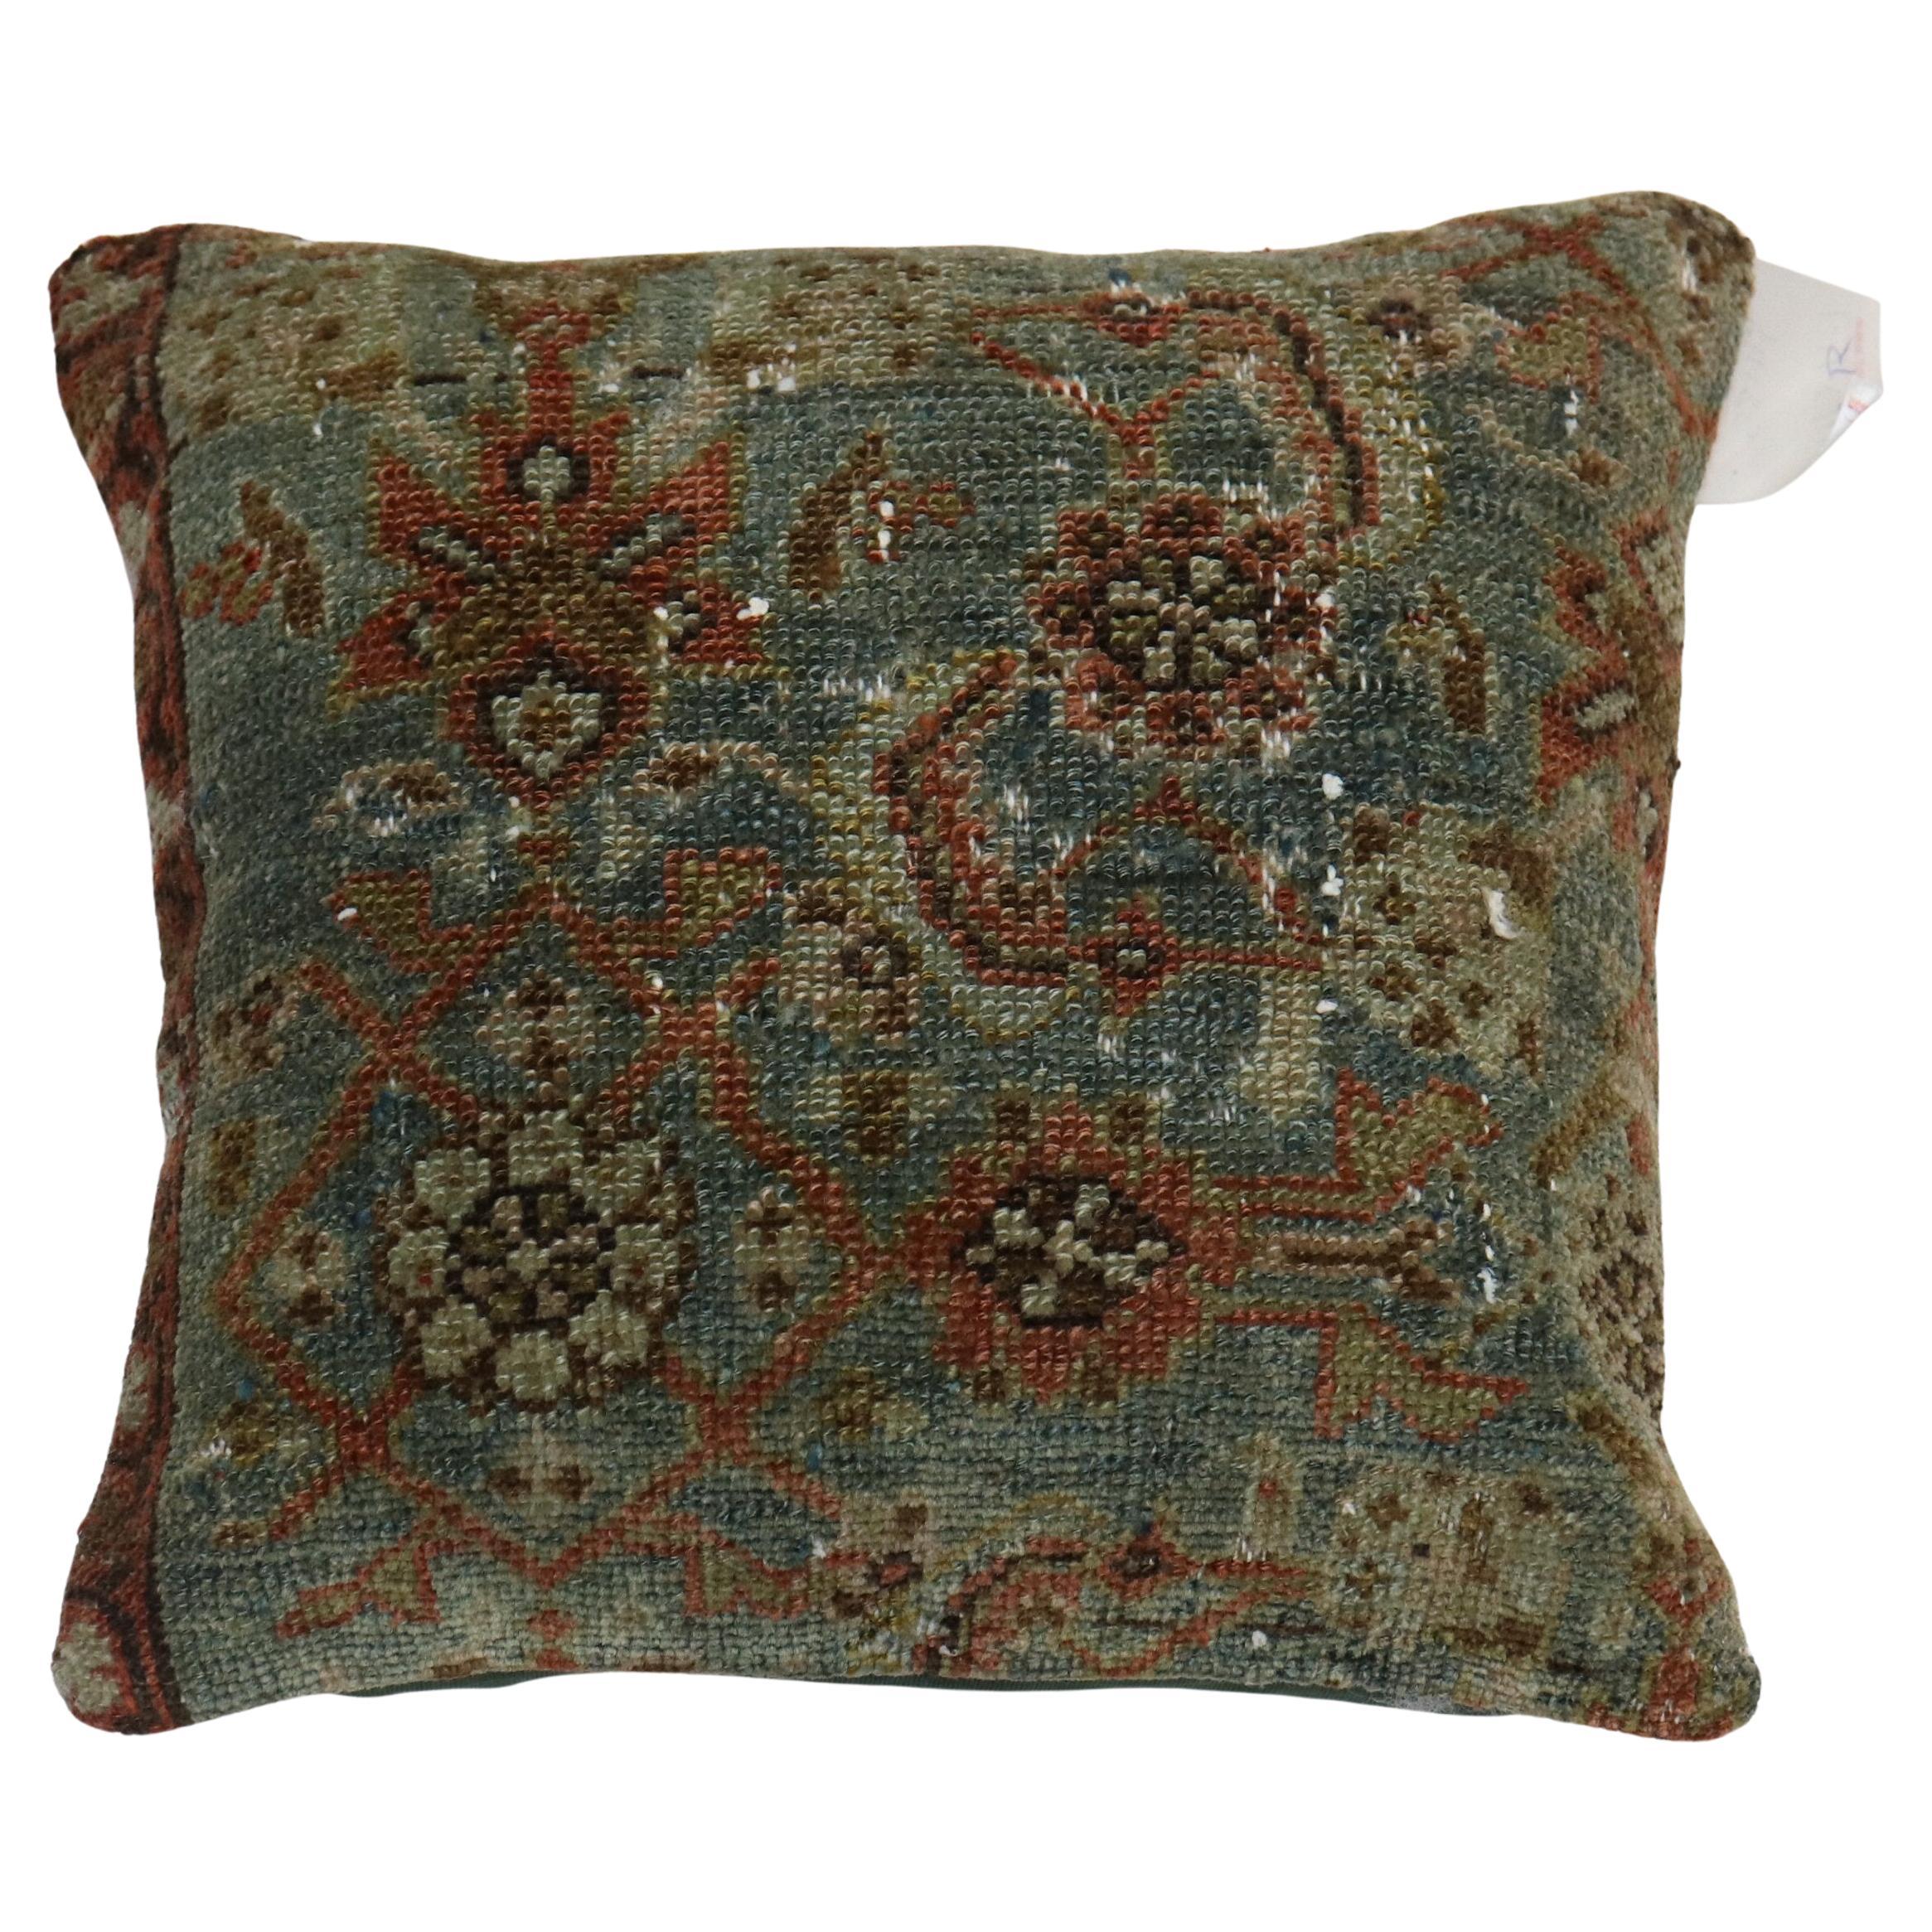 Pillow made from 20th century Persian rug.

Measures: 1'3